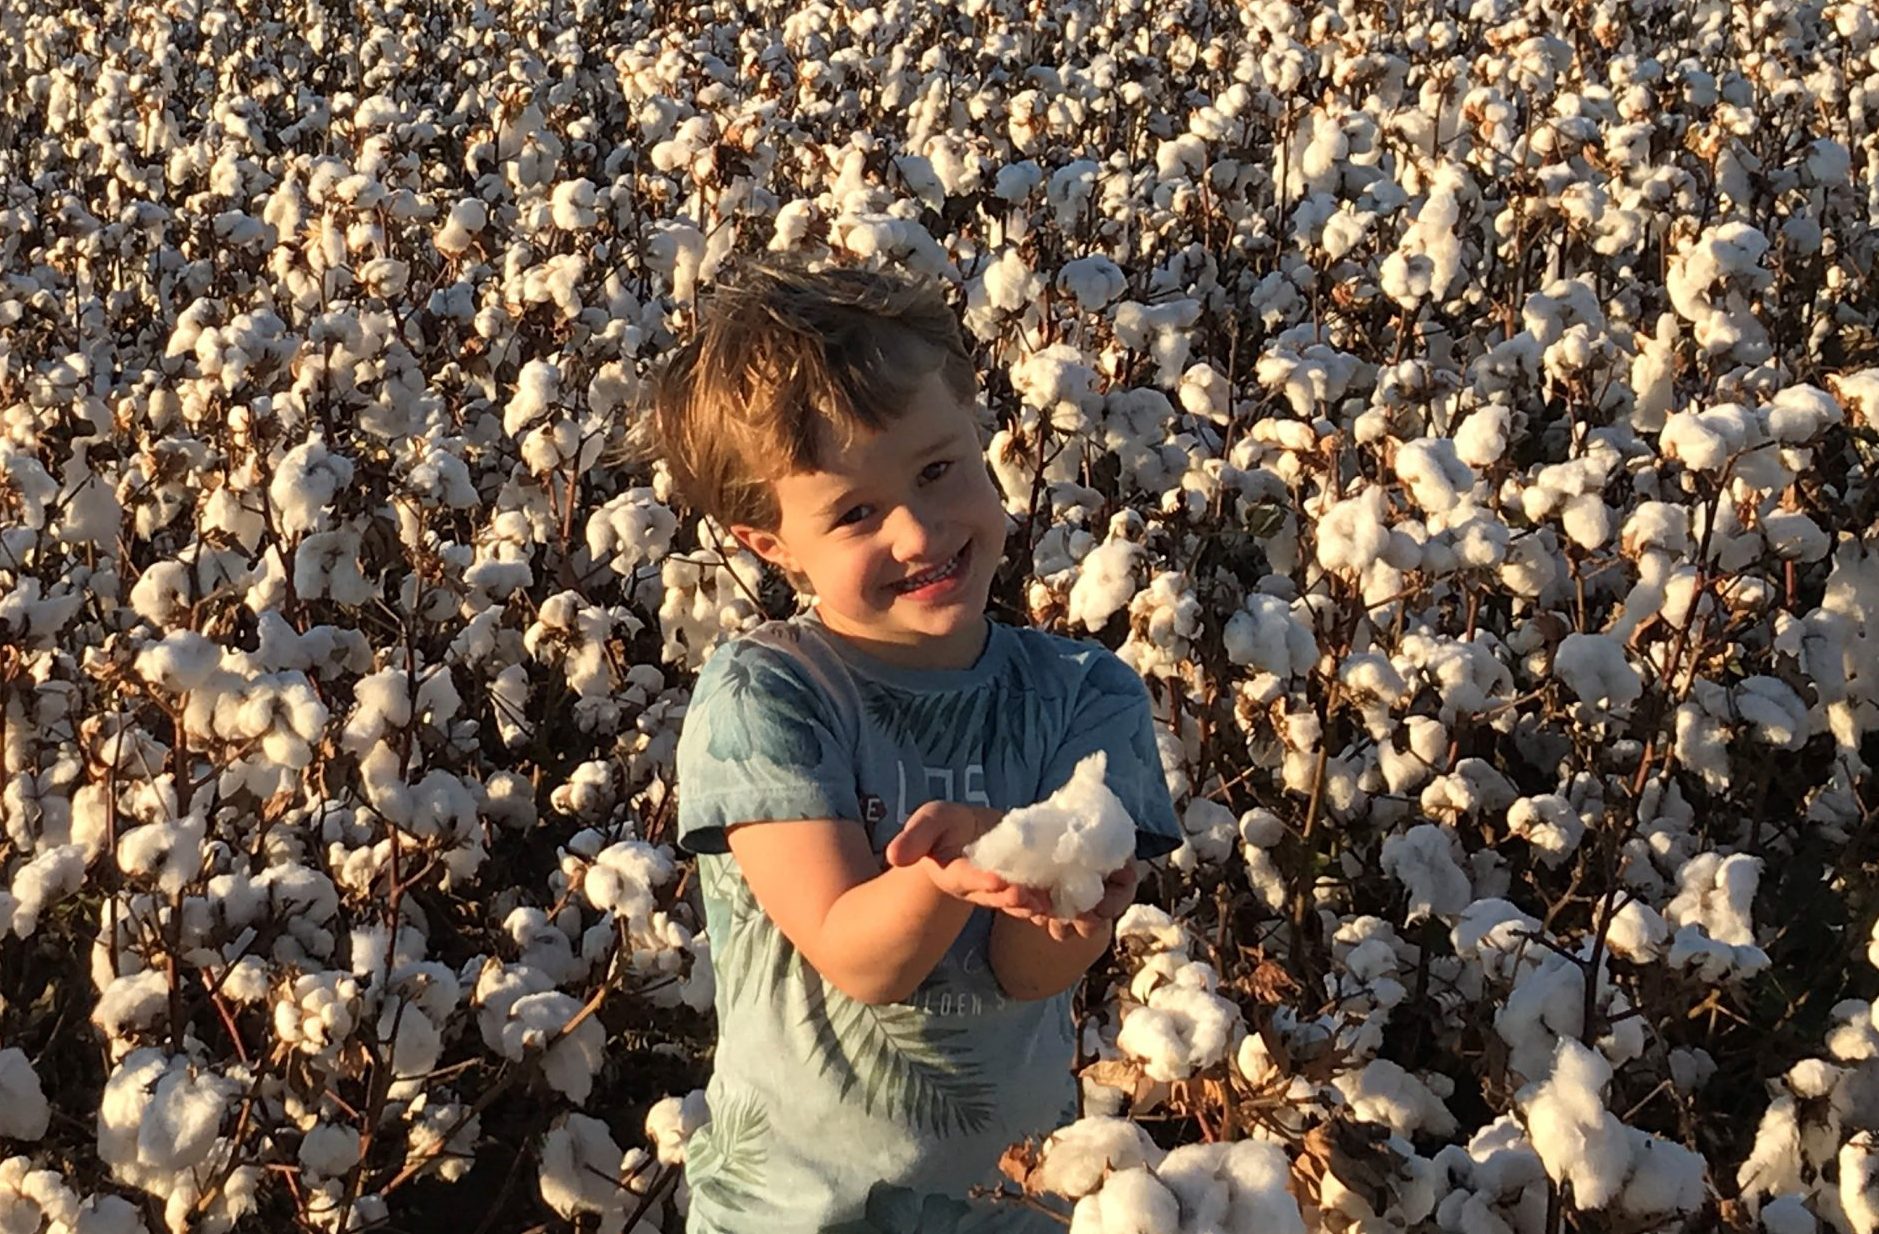 picking cotton field trip youtube